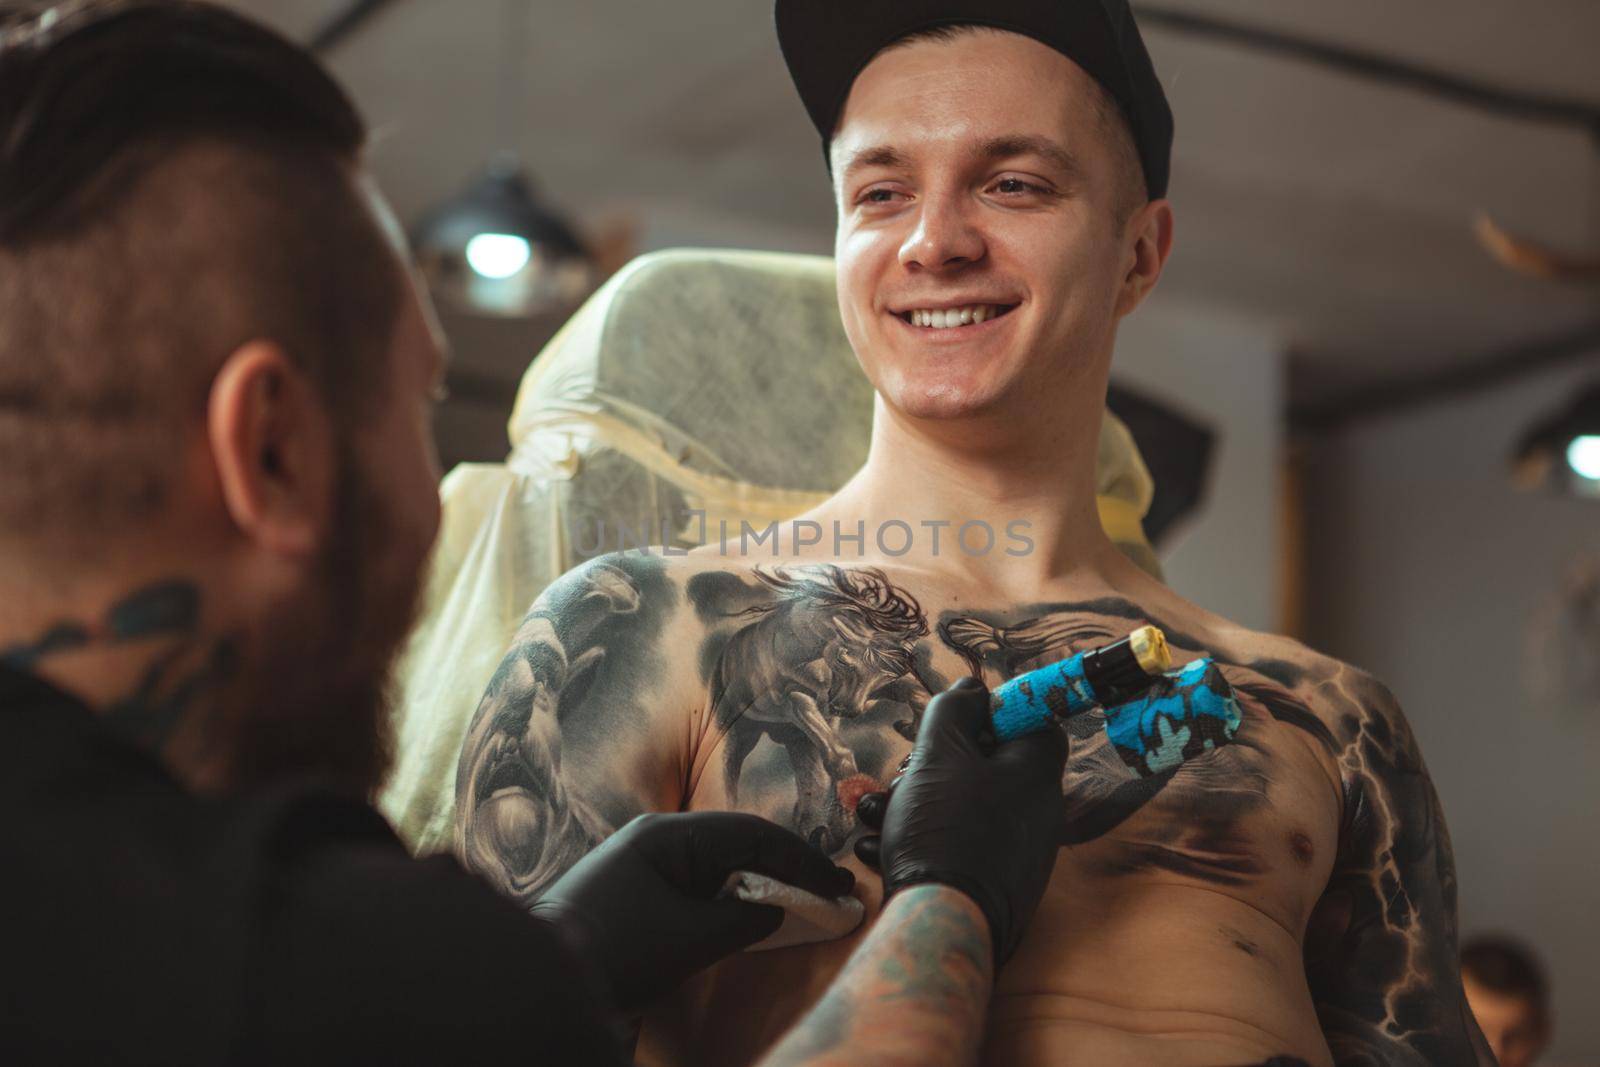 Handsome cheerful young man smiling, talking to his tattoo artist while getting inked at salon. Attractive male client getting chest tattoo by professional tattooist. Service, consumerism concept